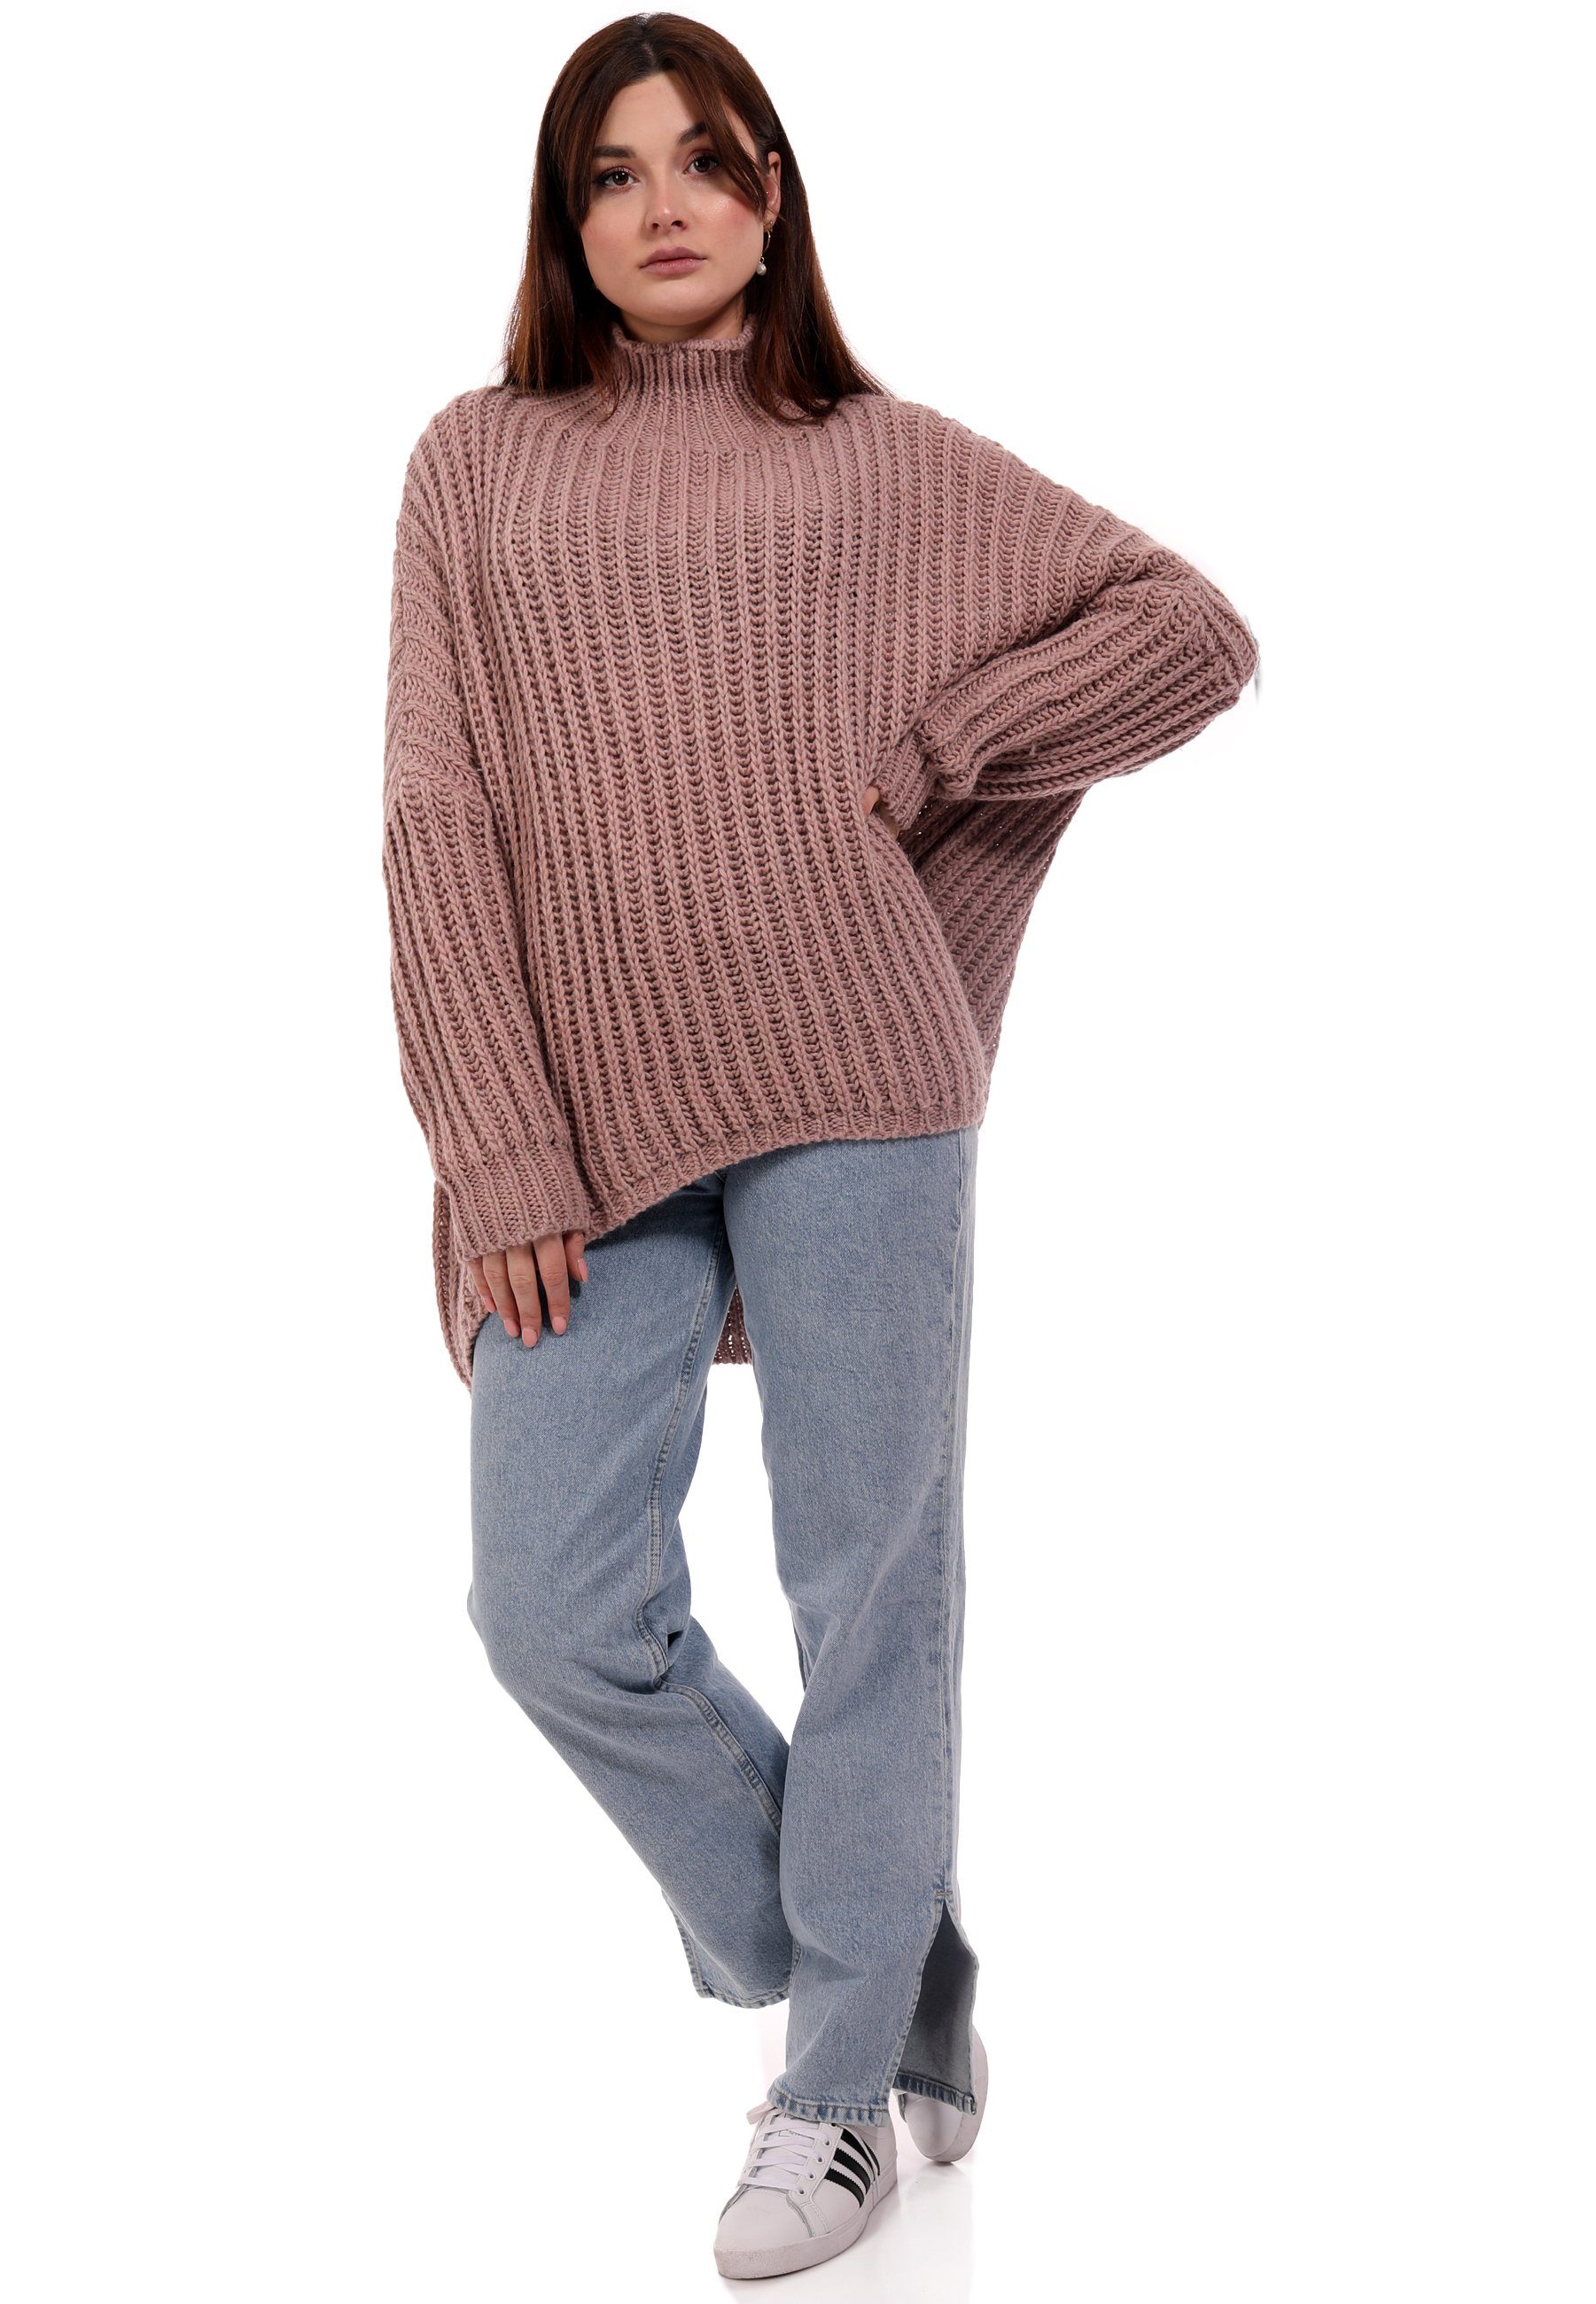 YC Fashion & Style Longpullover altrosa (1-tlg) casual Pullover Oversized Vokuhila Sweater One Size Grobstrick